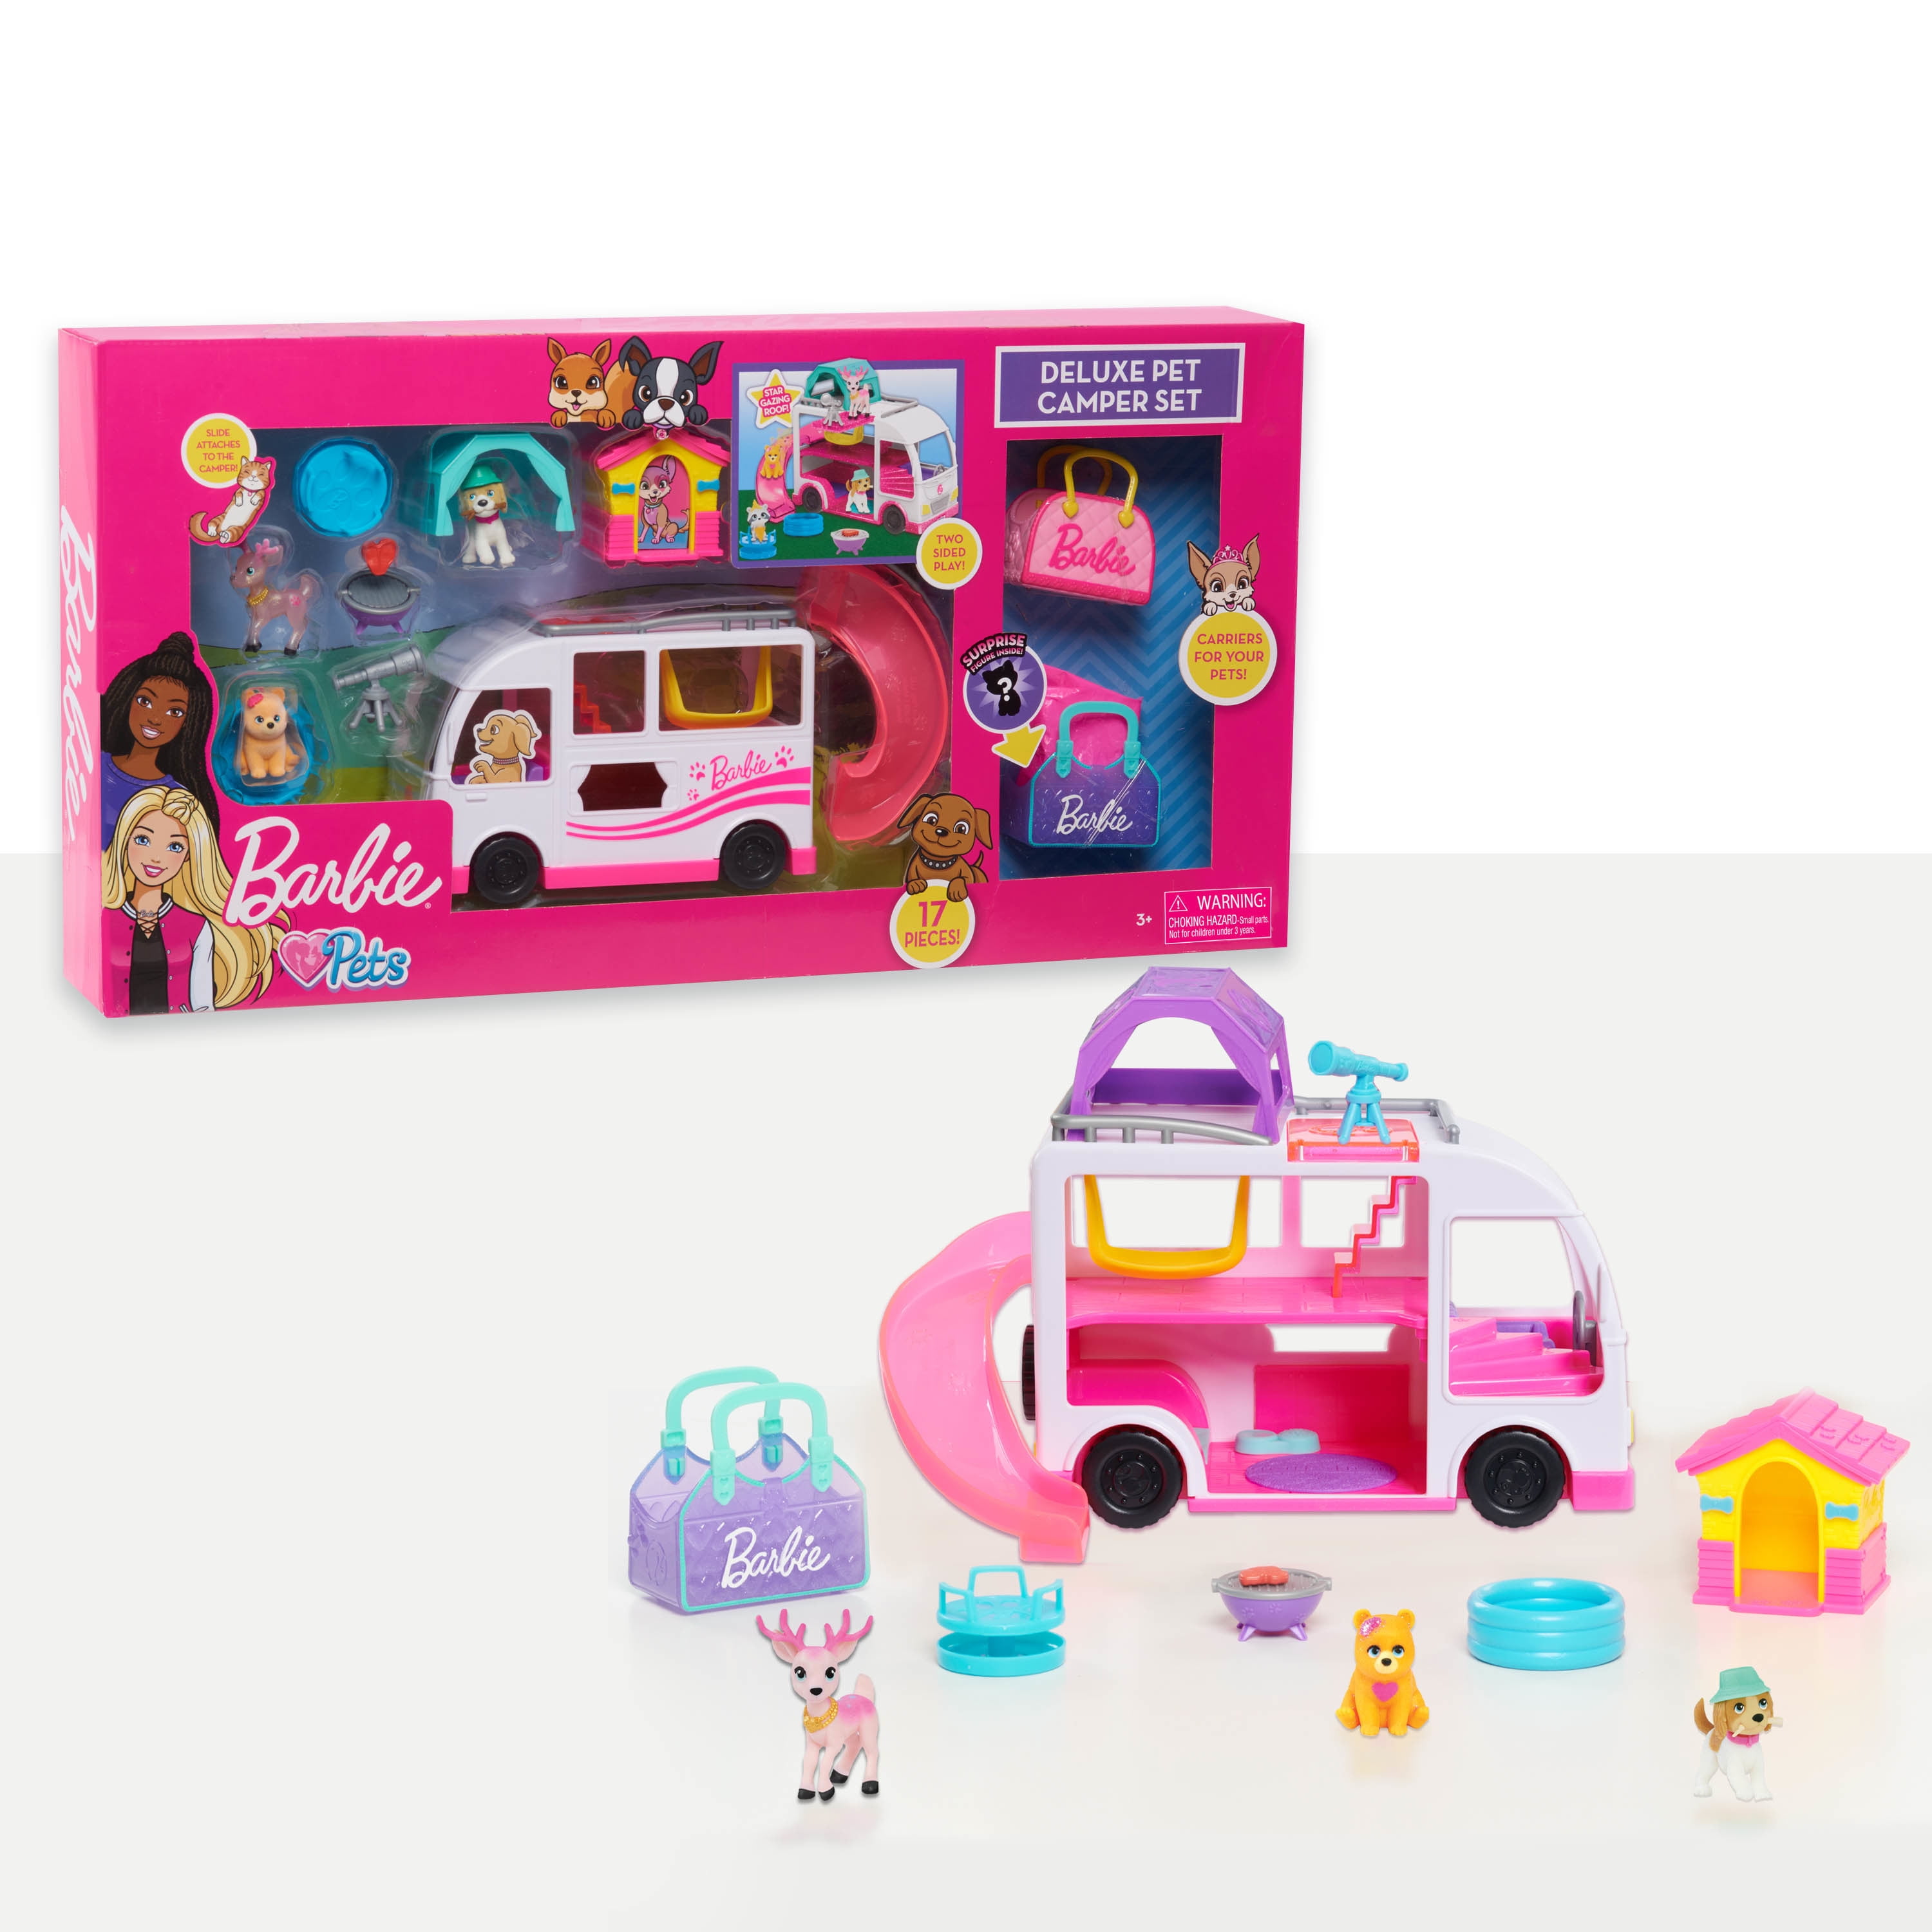 studie plus lineair Barbie Deluxe Pet Camper Playset with Figures, 17-pieces, Kids Toys for  Ages 3 Up, Gifts and Presents - Walmart.com